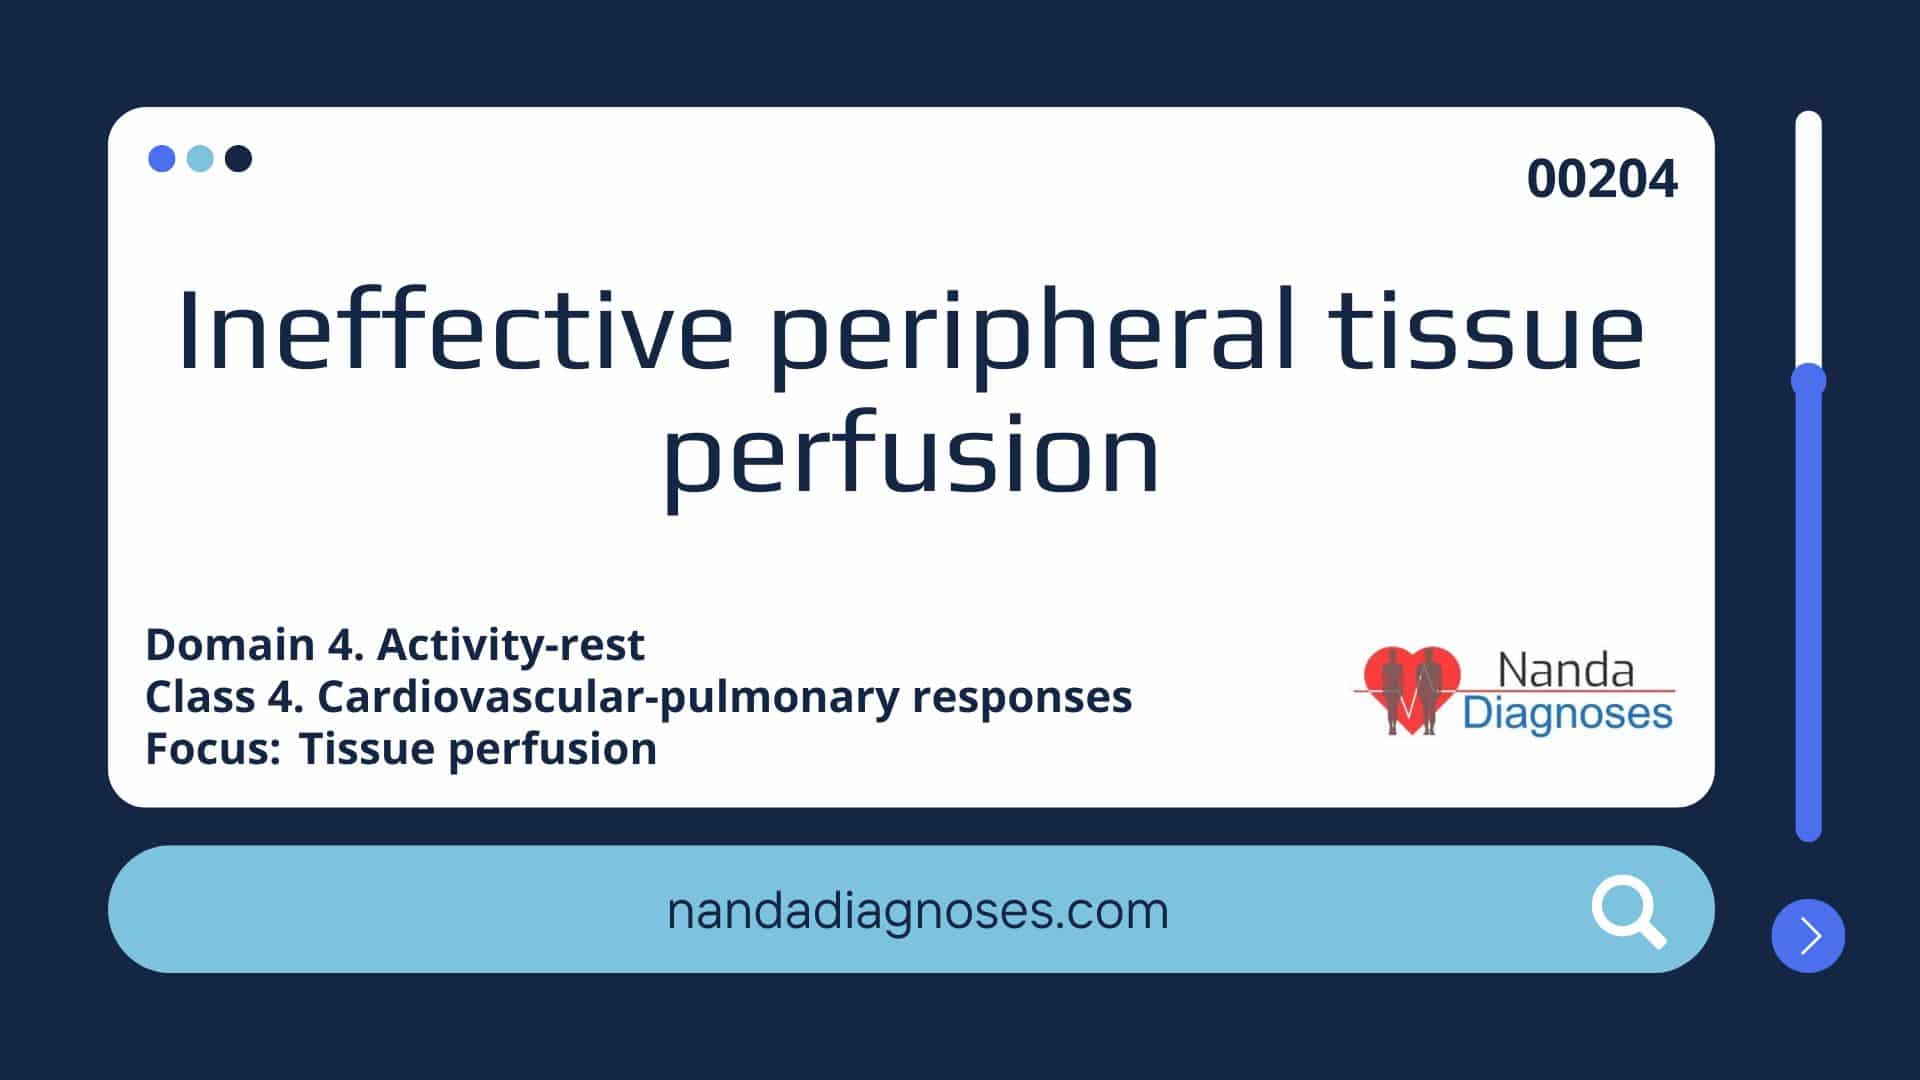 Ineffective peripheral tissue perfusion